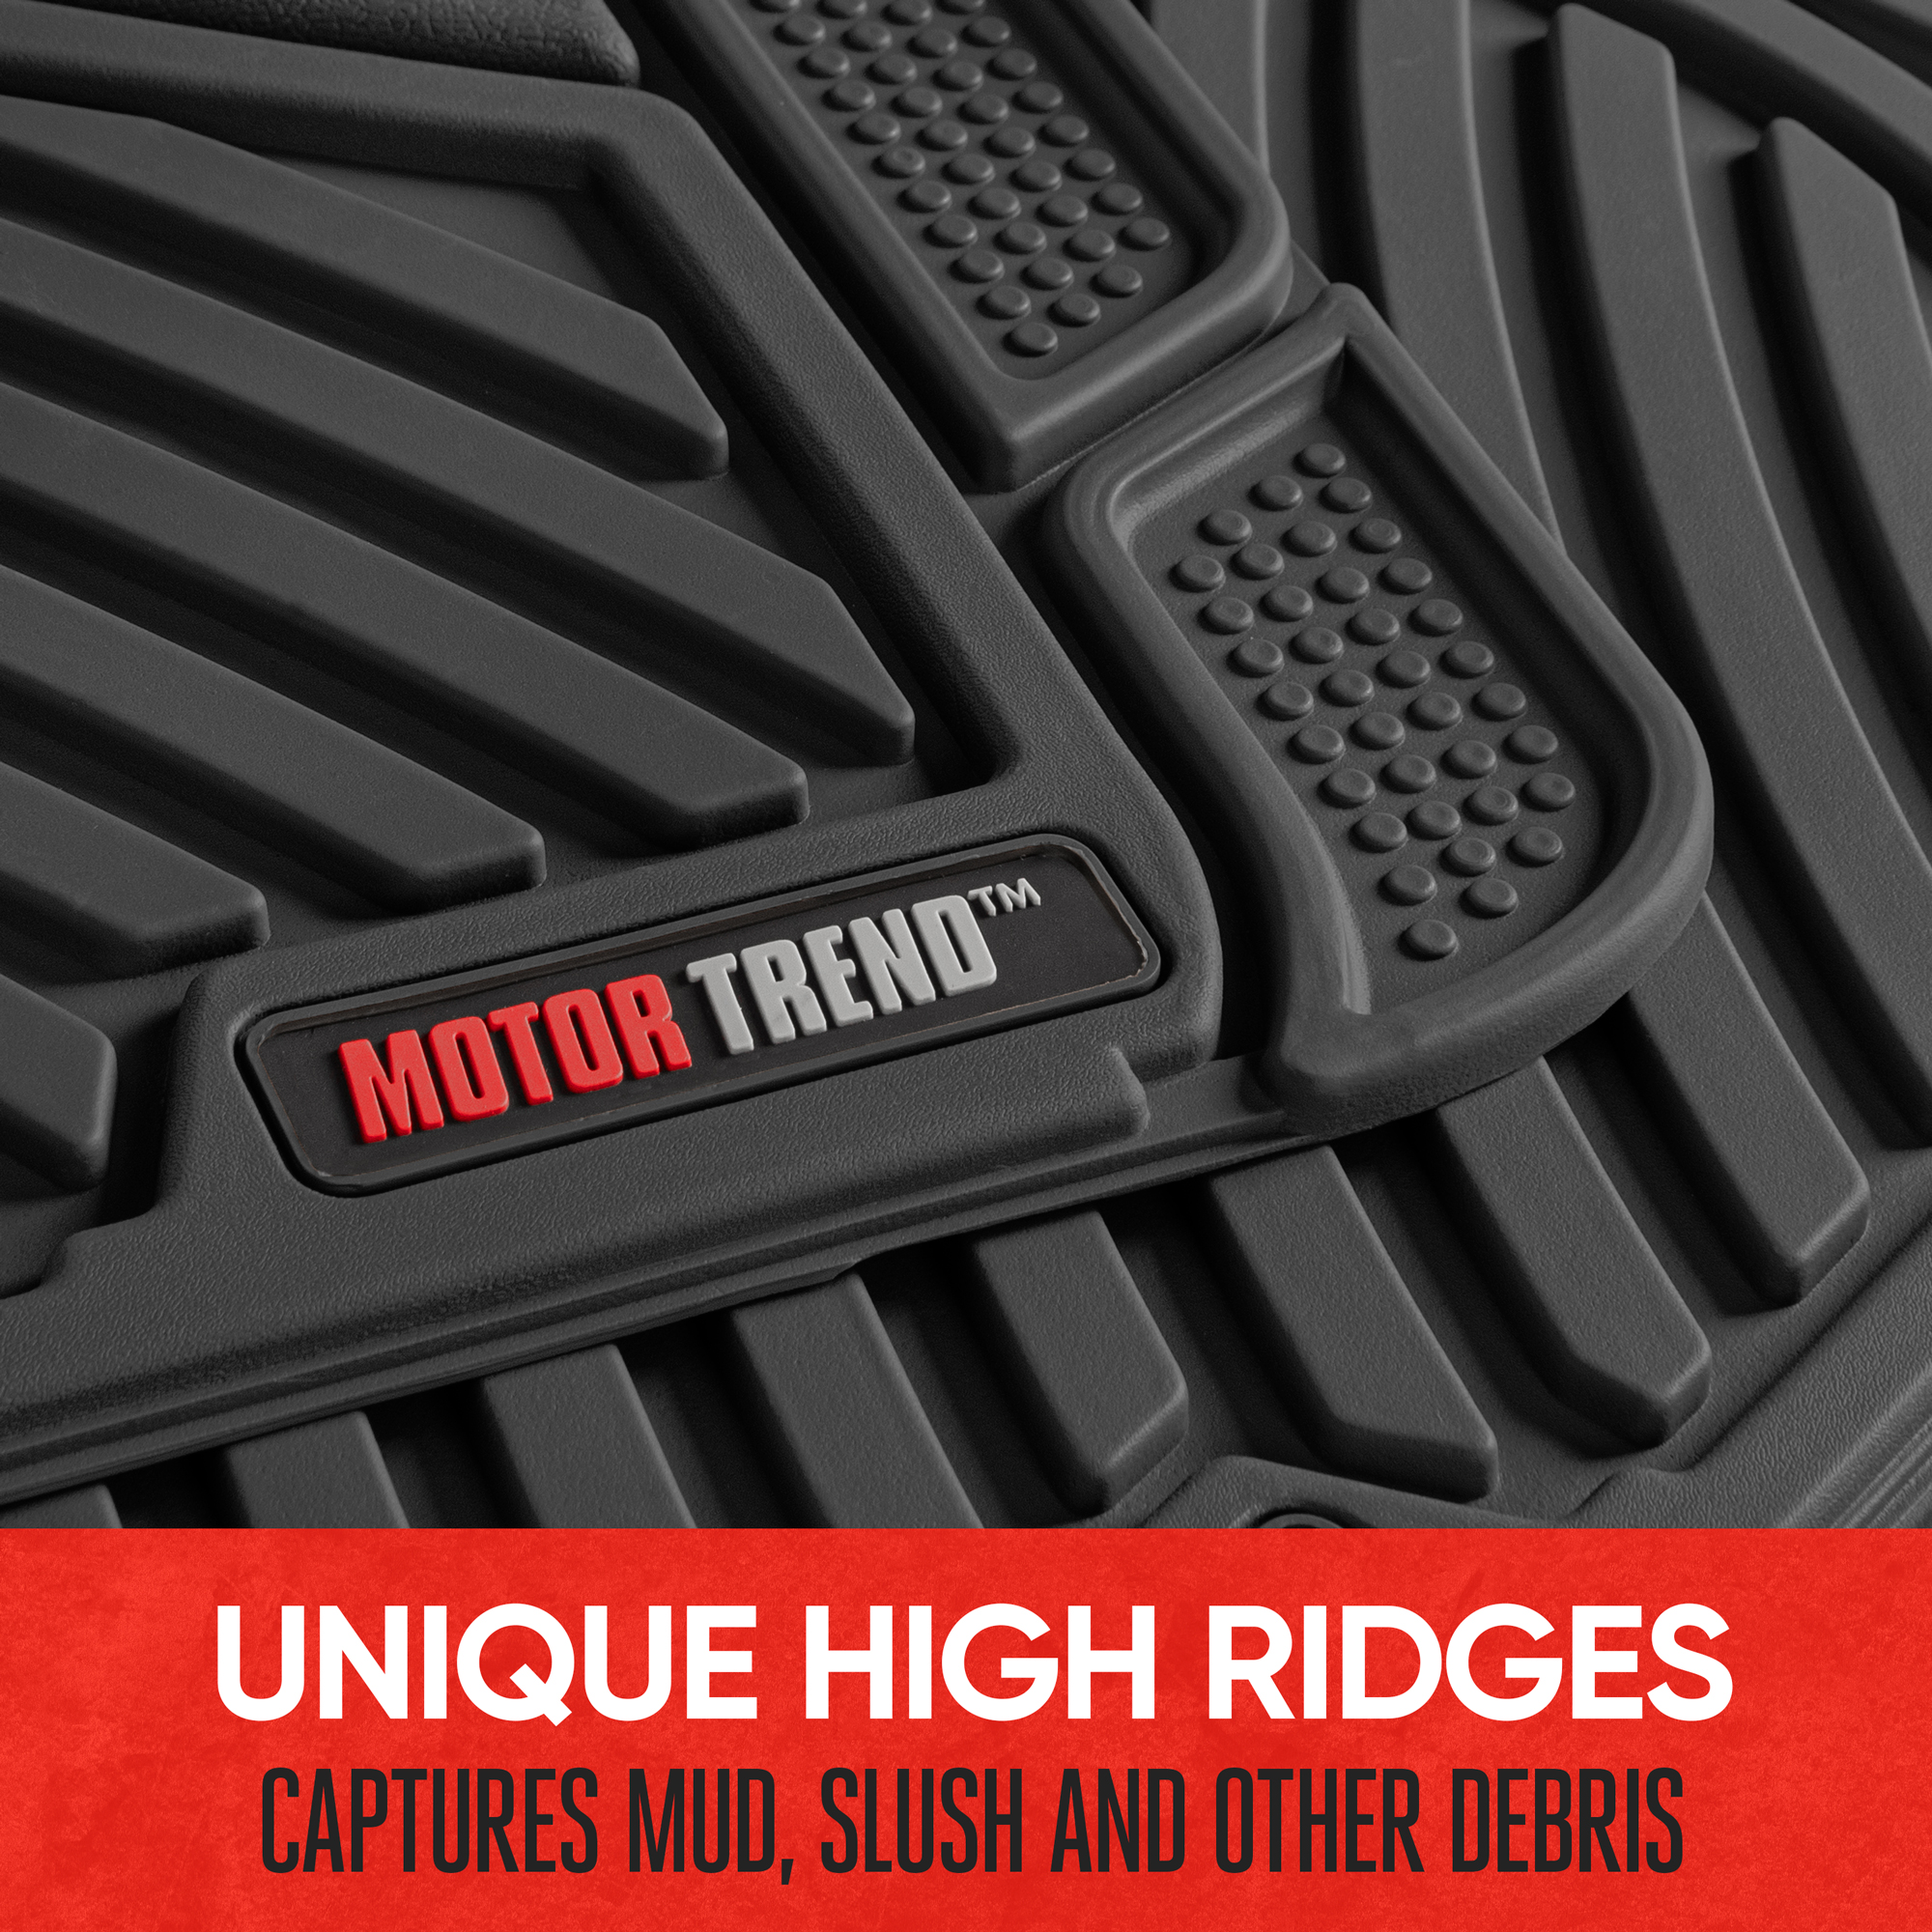 Motor Trend FlexTough Floor Mats for Car SUV and Van 3 Rows, Odorless EcoClean Liners, 3 Colors - image 9 of 10